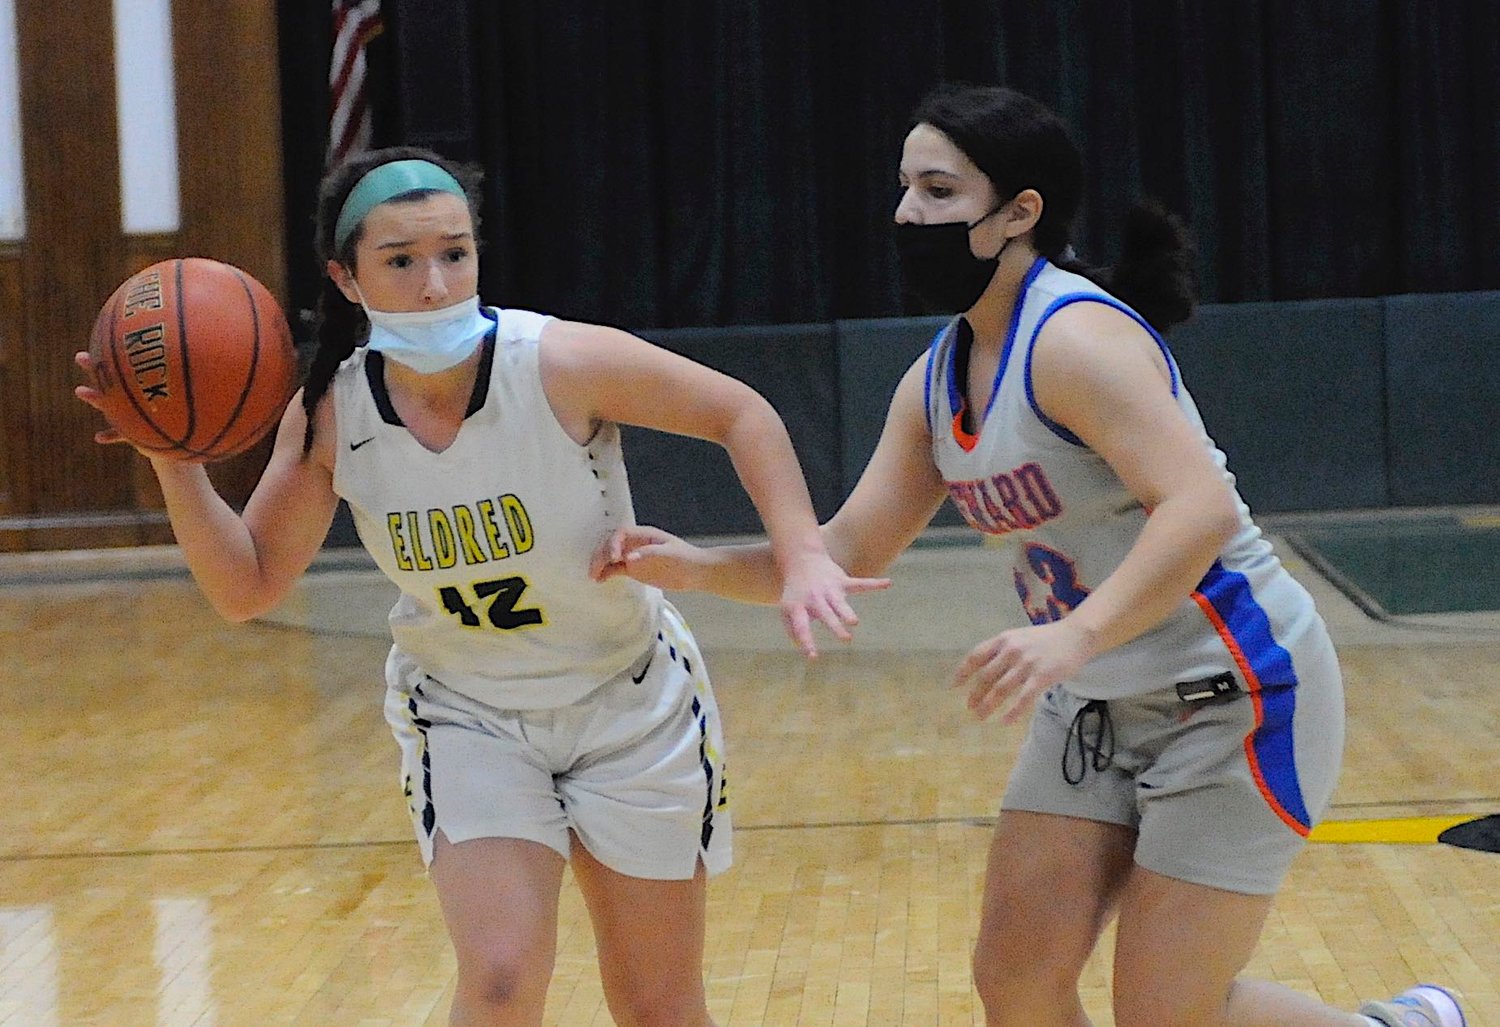 All masked up and ready to rock. Eldred’s Dana Donnelly scored 4 points, while Seward’s Kayla Valenti posted 8.